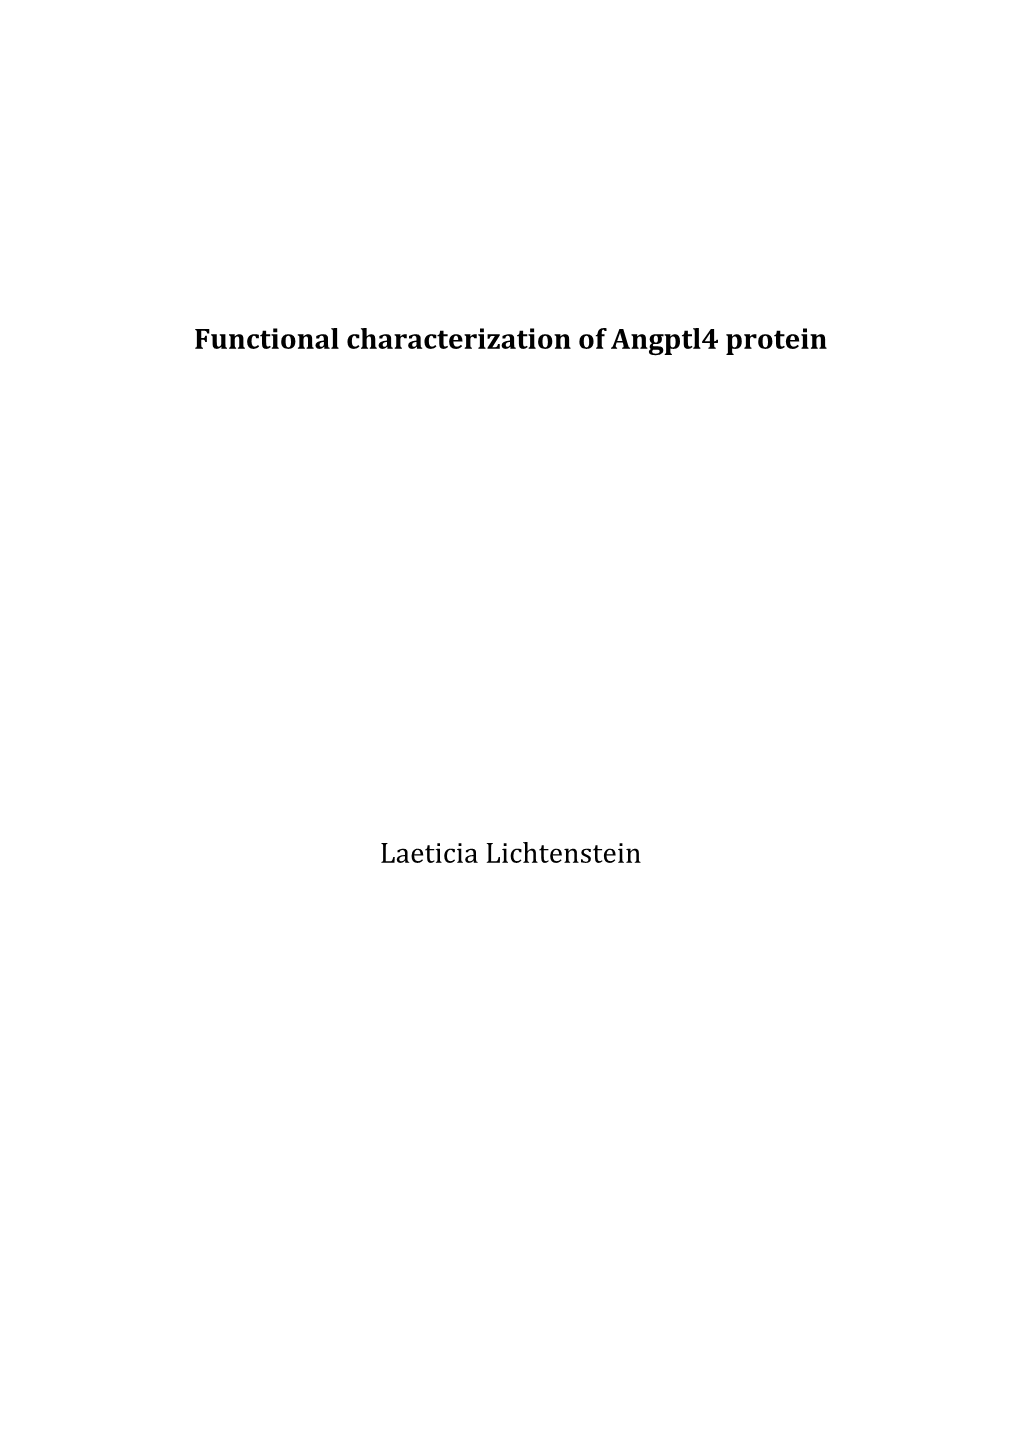 Functional Characterization of Angptl4 Protein Laeticia Lichtenstein